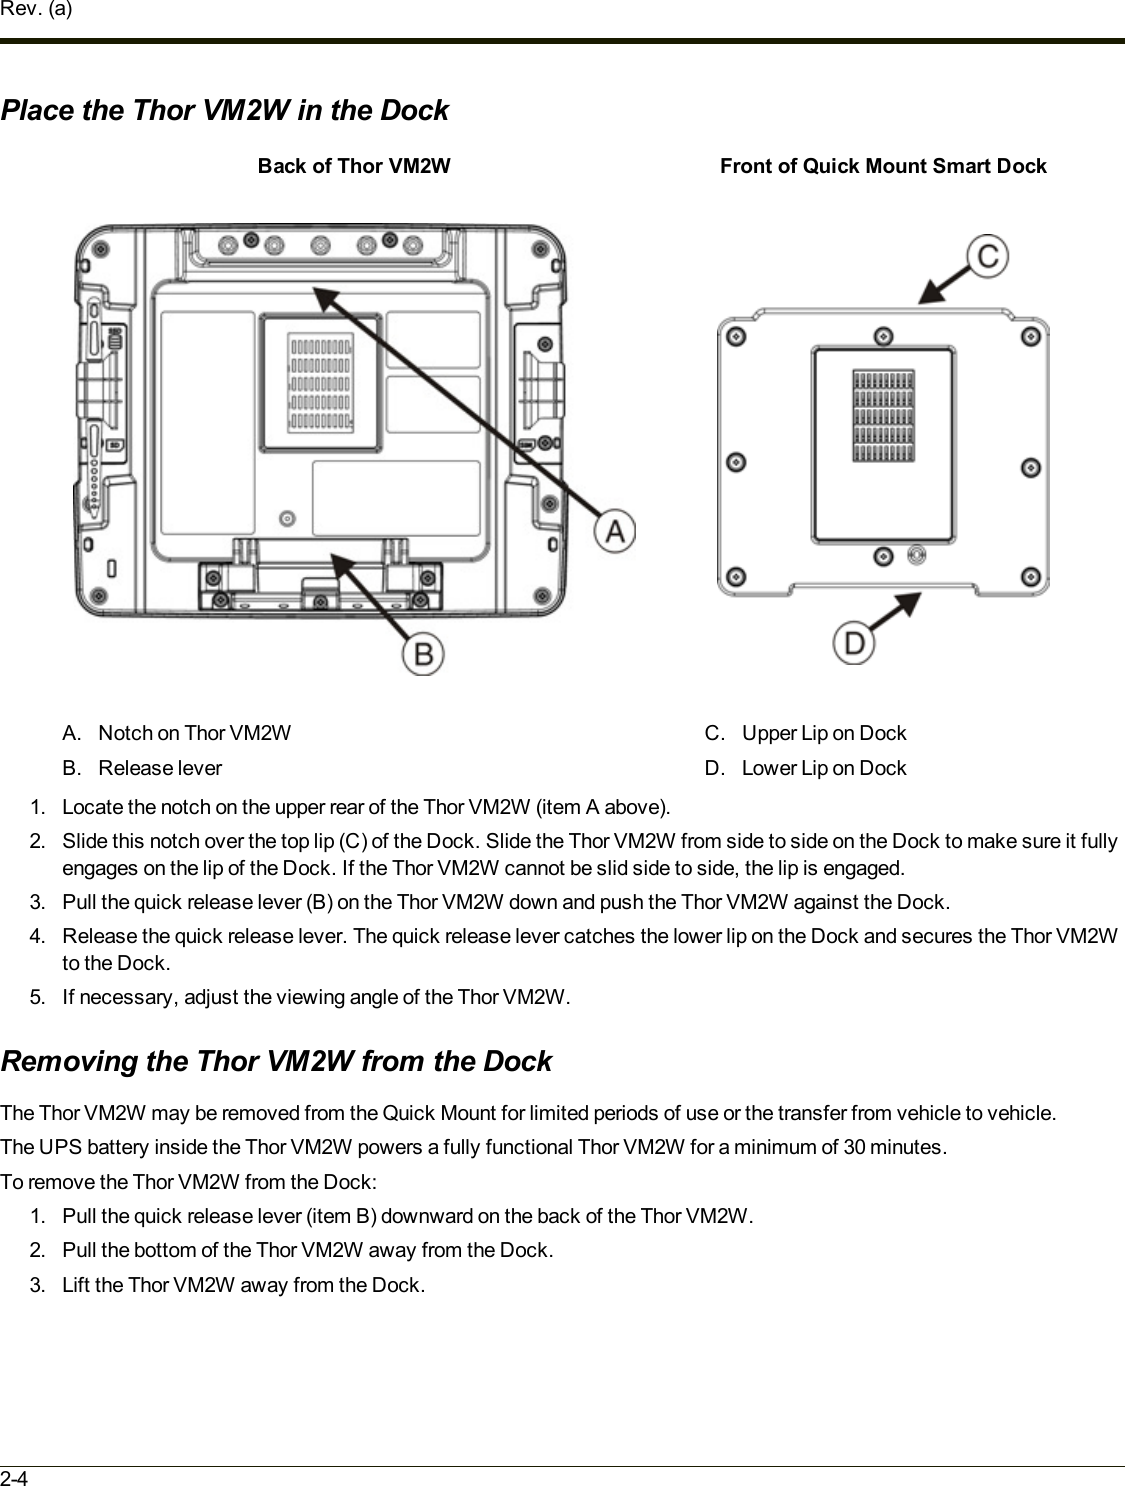 Rev. (a)Place the Thor VM2W in the DockBack of Thor VM2W Front of Quick Mount Smart DockA. Notch on Thor VM2WB. Release leverC. Upper Lip on DockD. Lower Lip on Dock1. Locate the notch on the upper rear of the Thor VM2W (item A above).2. Slide this notch over the top lip (C)of the Dock. Slide the Thor VM2W from side to side on the Dock to make sure it fullyengages on the lip of the Dock. If the Thor VM2W cannot be slid side to side, the lip is engaged.3. Pull the quick release lever (B) on the Thor VM2W down and push the Thor VM2W against the Dock.4. Release the quick release lever. The quick release lever catches the lower lip on the Dock and secures the Thor VM2Wto the Dock.5. If necessary, adjust the viewing angle of the Thor VM2W.Removing the Thor VM2W from the DockThe Thor VM2W may be removed from the Quick Mount for limited periods of use or the transfer from vehicle to vehicle.The UPS battery inside the Thor VM2W powers a fully functional Thor VM2W for a minimum of 30 minutes.To remove the Thor VM2W from the Dock:1. Pull the quick release lever (item B) downward on the back of the Thor VM2W.2. Pull the bottom of the Thor VM2W away from the Dock.3. Lift the Thor VM2W away from the Dock.2-4